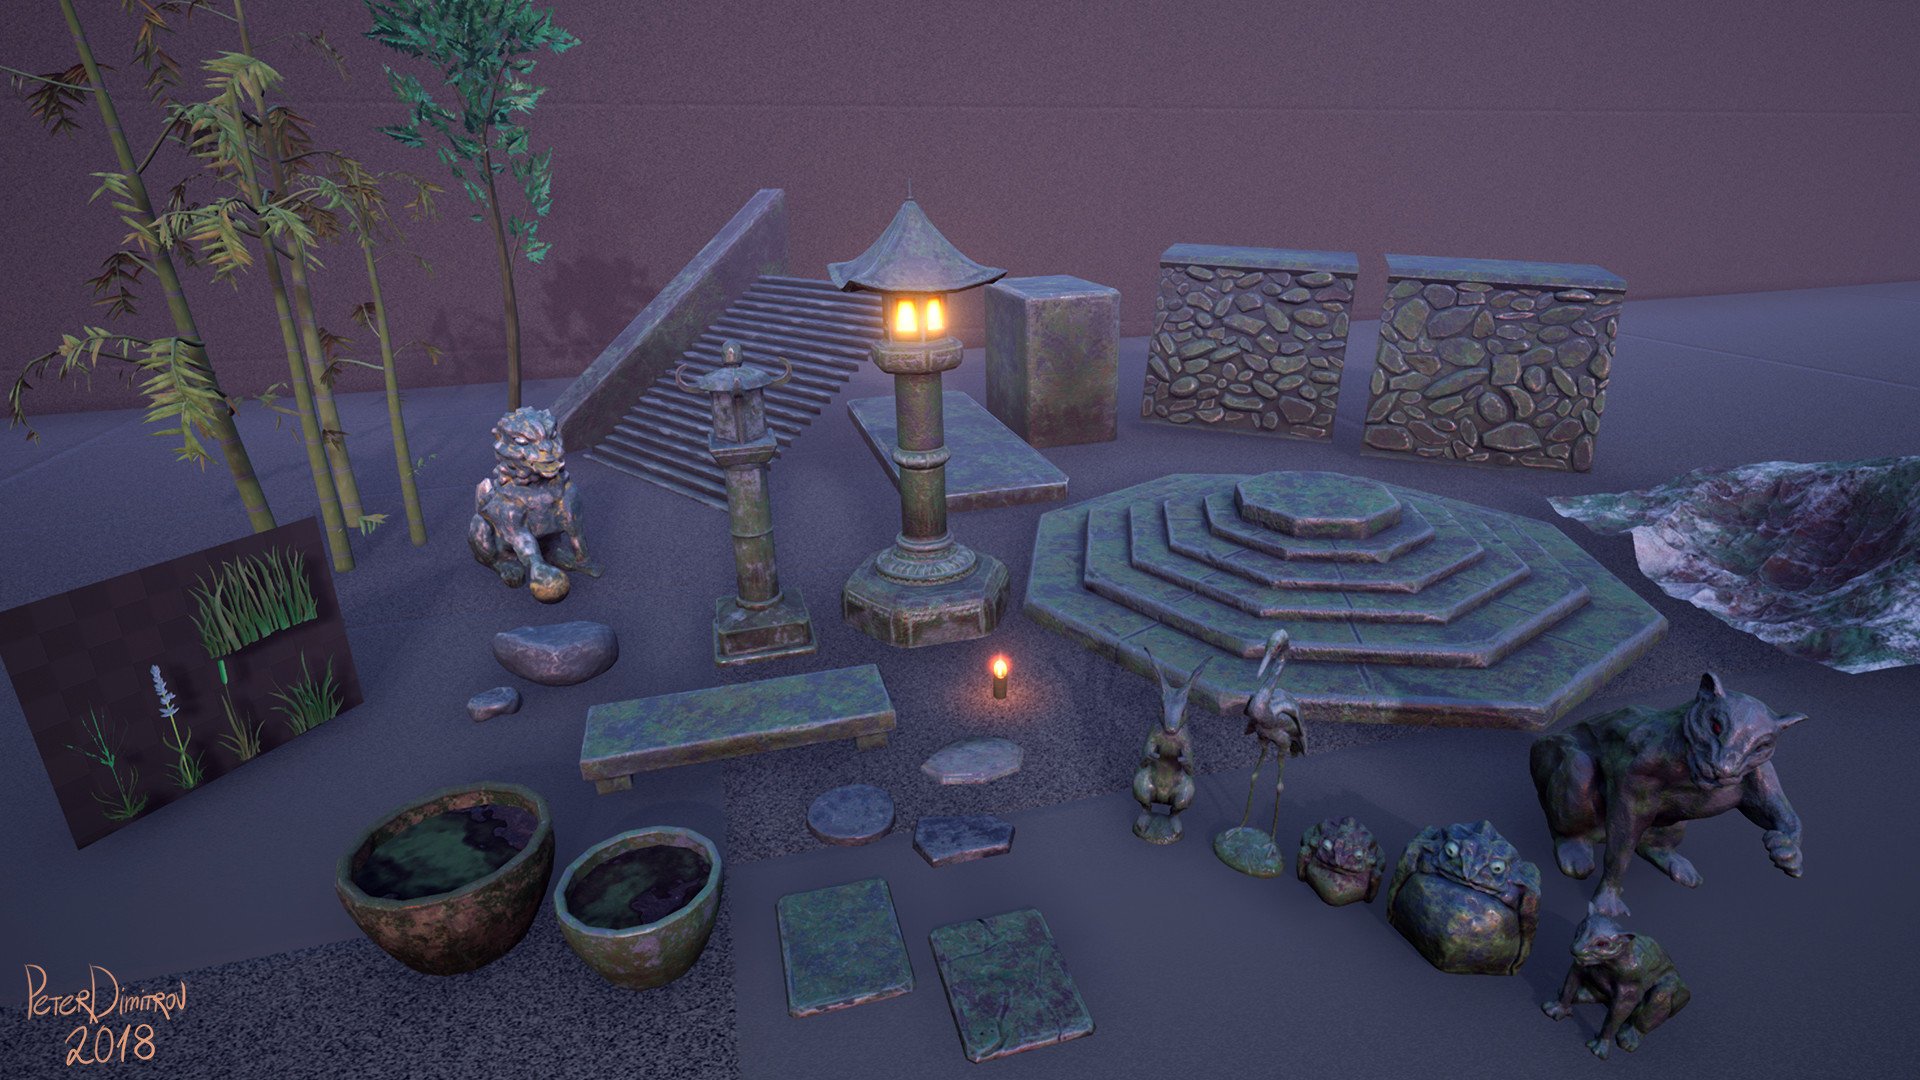 Callout sheet image one. Shows the bamboo, foliage cards, the statues, all the animals, stone lanterns, stone steps, water basins, the mountain used in the backdrop but scaled down multiple times to fit the showcase callout sheet.